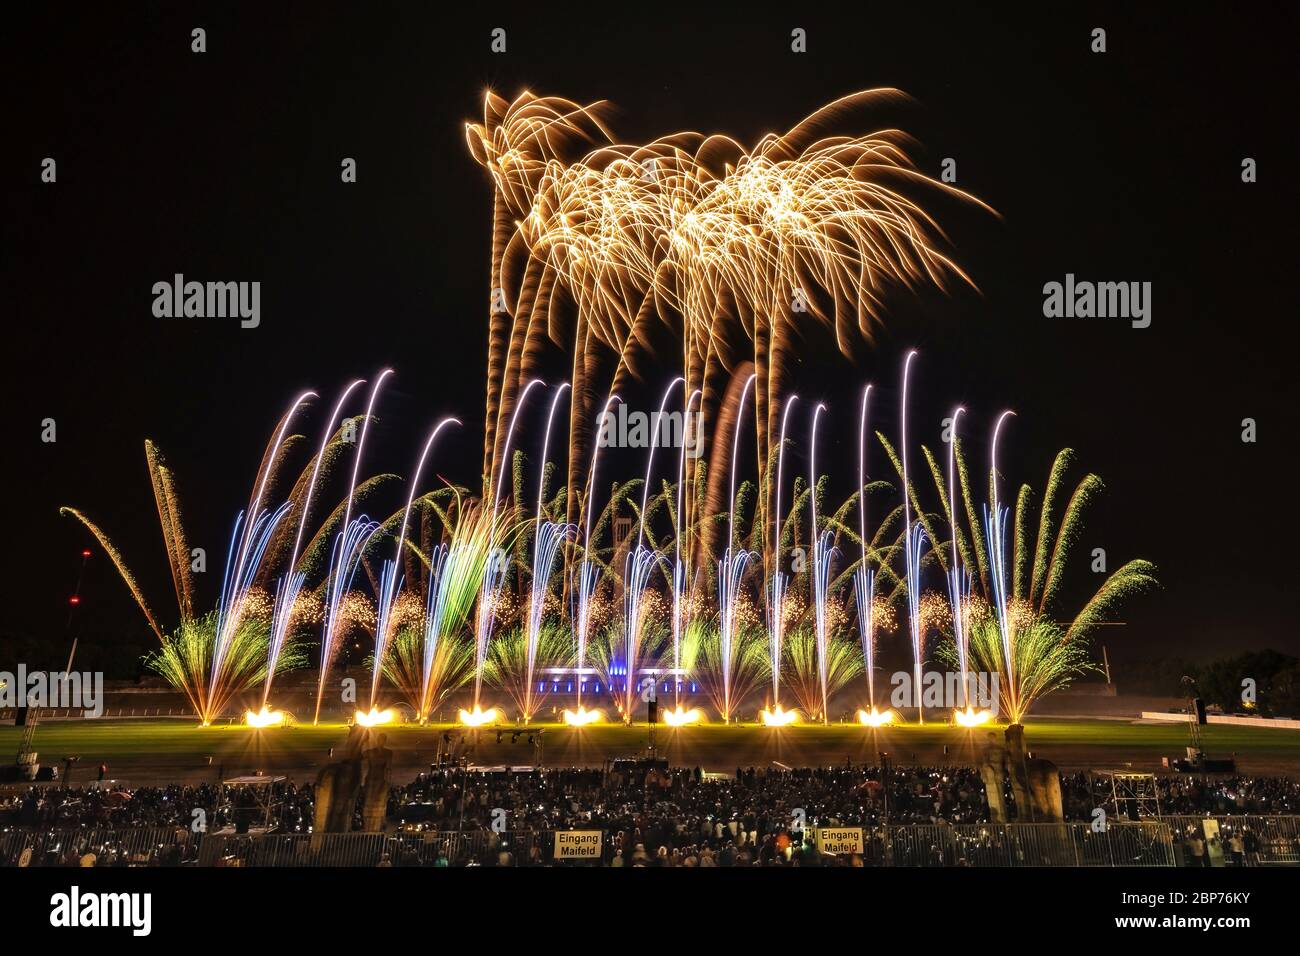 North Star Fireworks (Norwegen), Fireworks at the highest level, showdown of the Koenigsklasse at the Pyronale 2019 on the Maifeld in front of the Berlin Olympic Stadium. Stock Photo